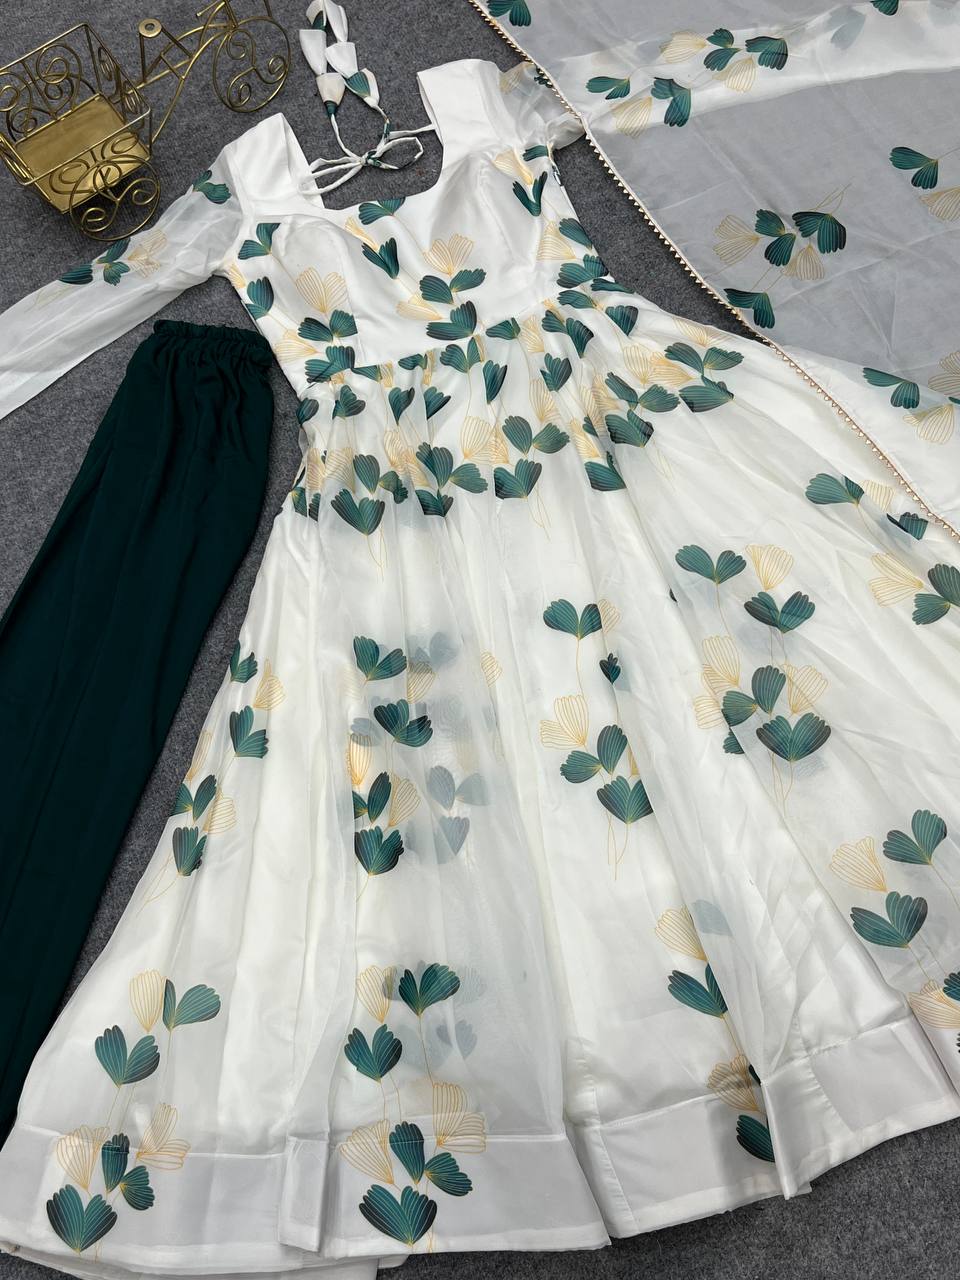 Buy White Anarkali online at Best Prices in India